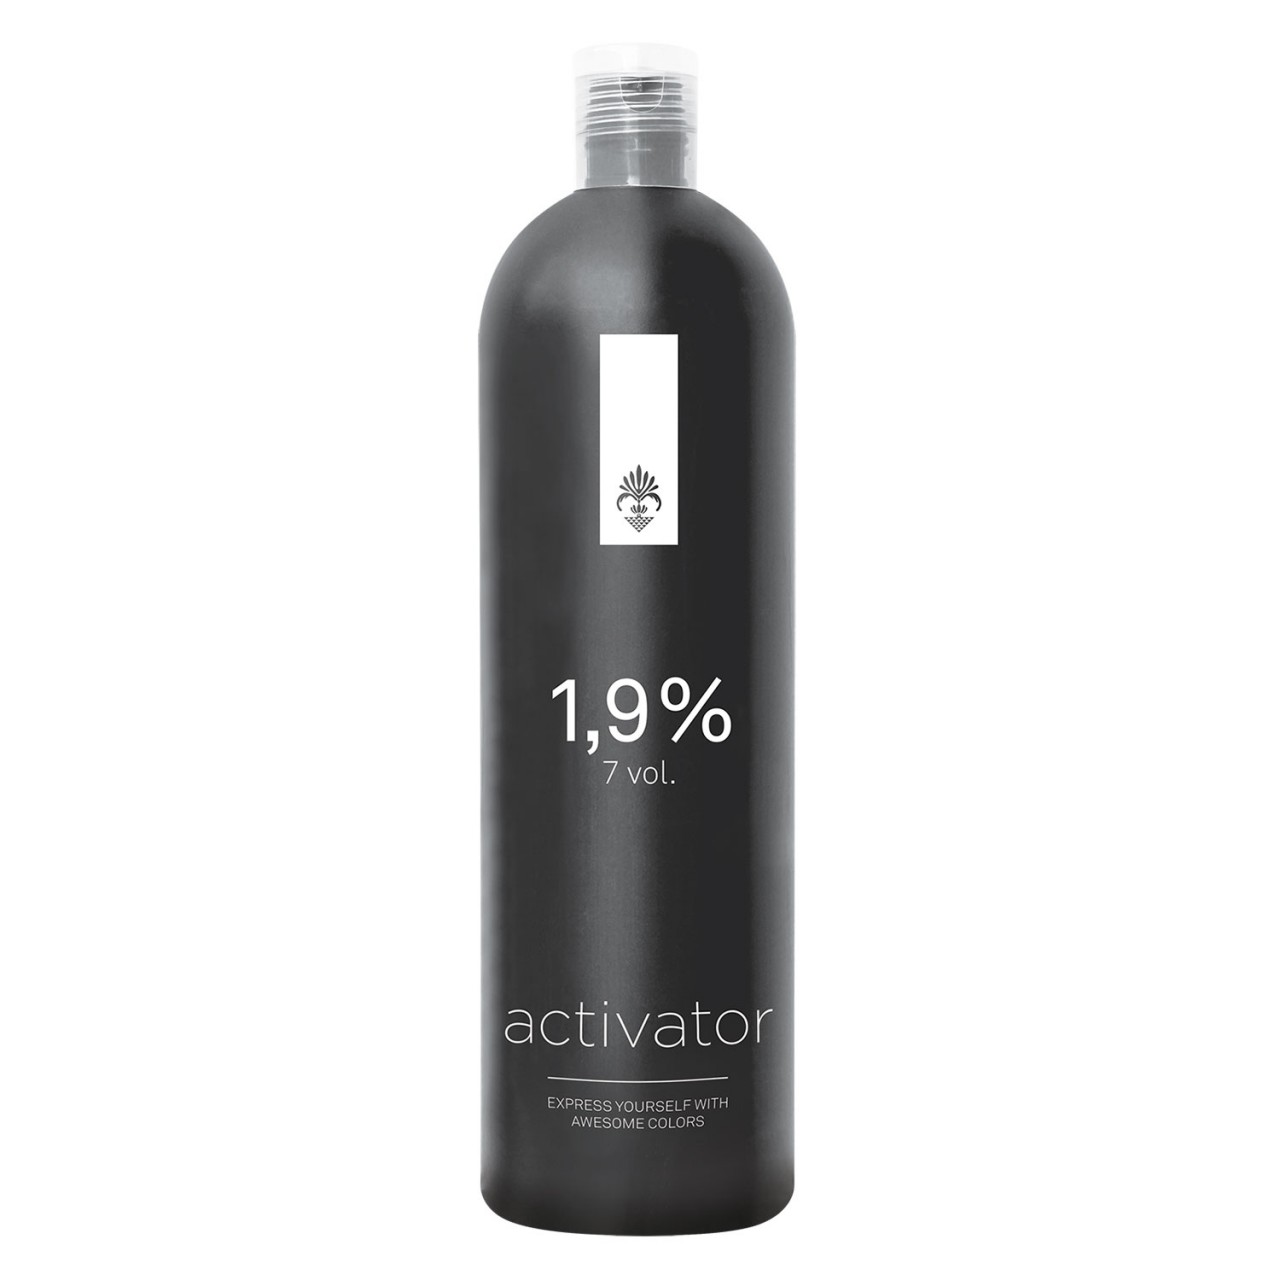 AWESOMEcolors - Activator-Tönungsemuls. 1.9% von AWESOMEcolors